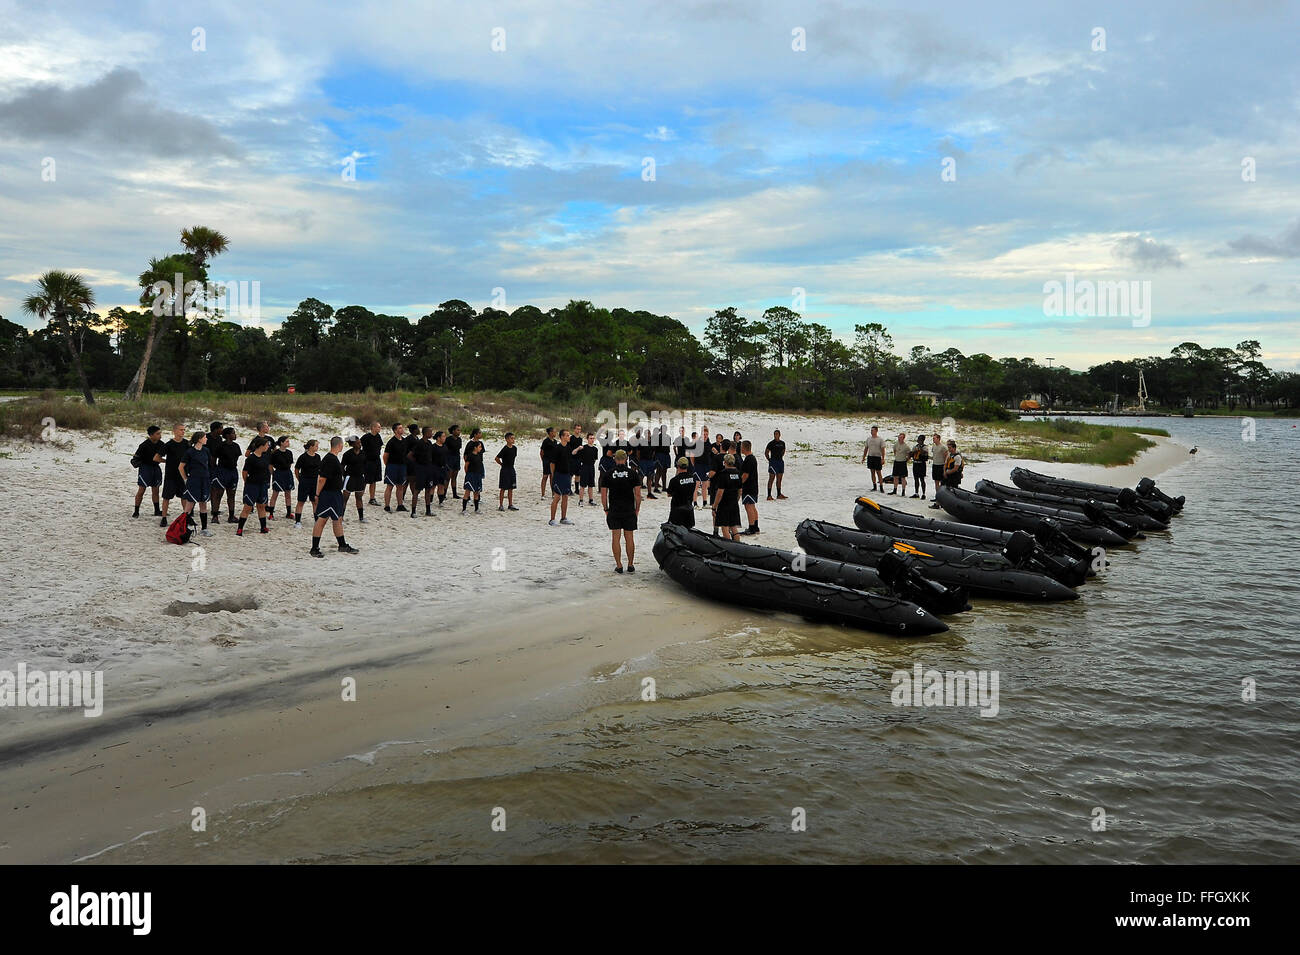 Cadets get briefed by cadre at the marina on Hurlburt Field, Fla., prior to riding on boats. Stock Photo